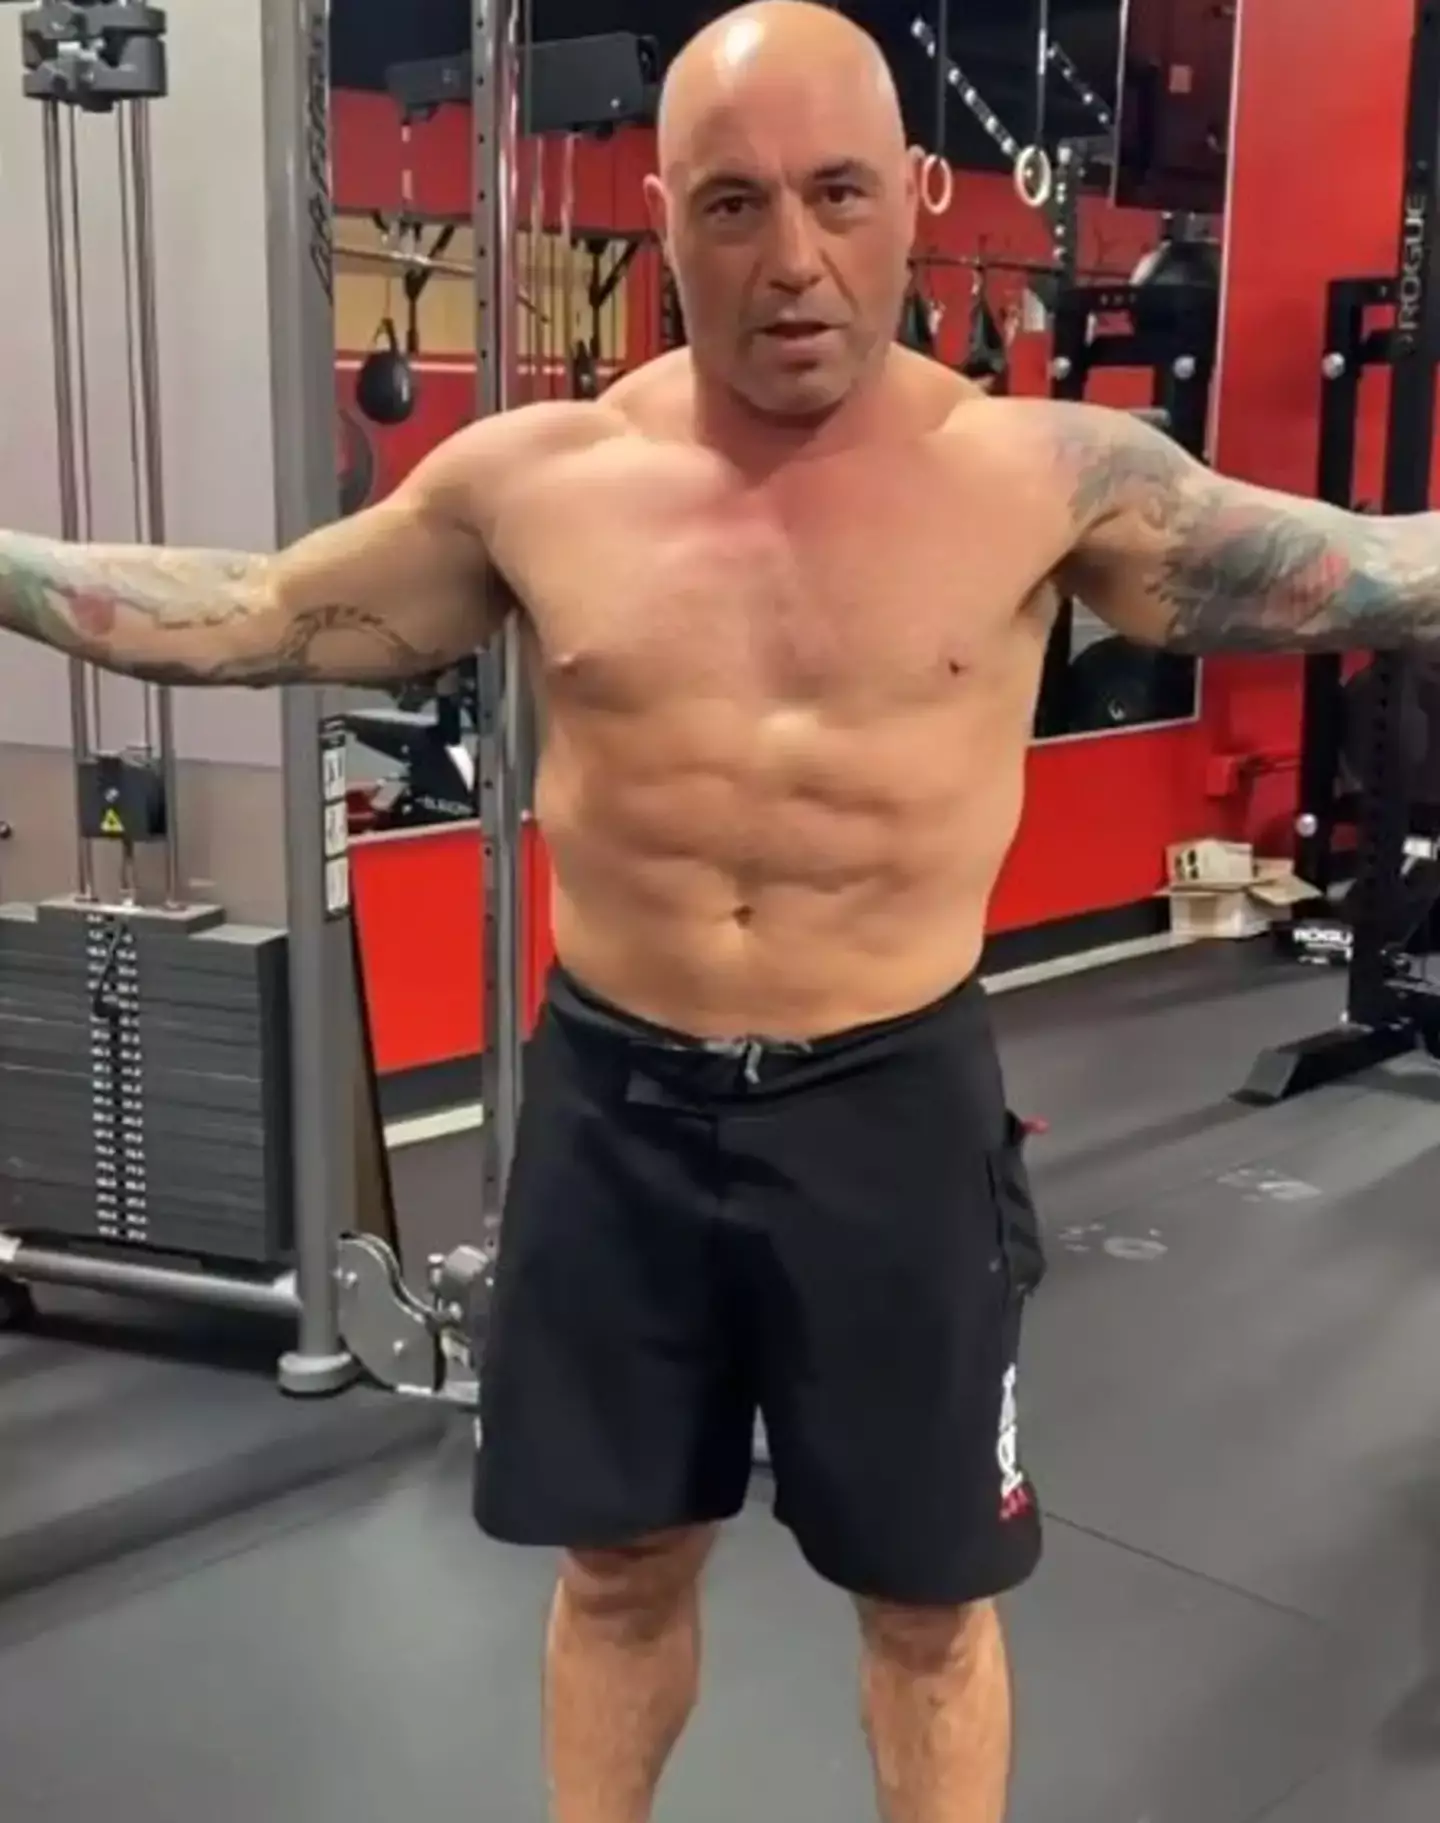 Rogan shed 12 lbs by following a ‘carnivore diet’.